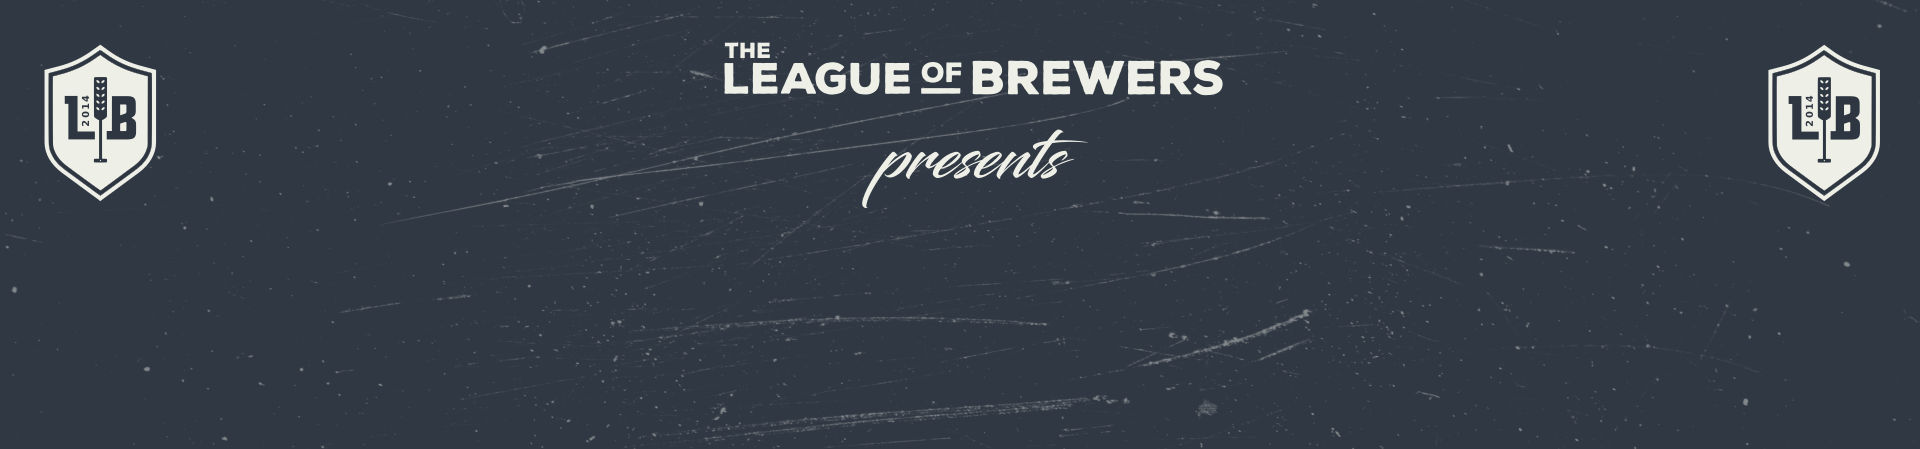 League of Brewers presents: Partial Extract Kits